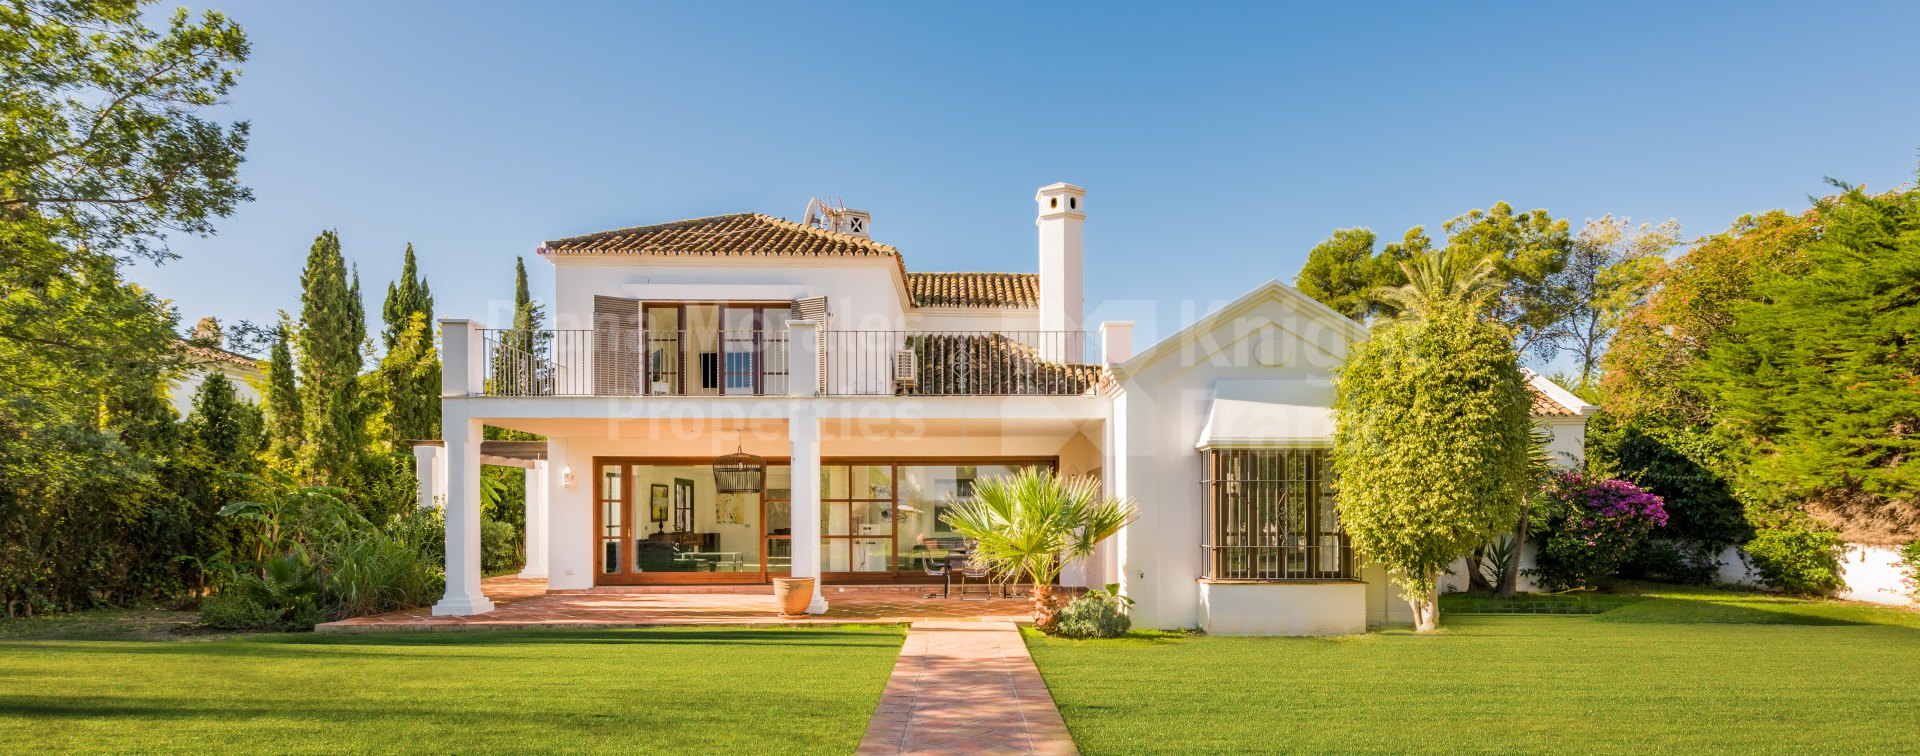 Fabulous villa with private padel court for rent in Guadalmina Baja